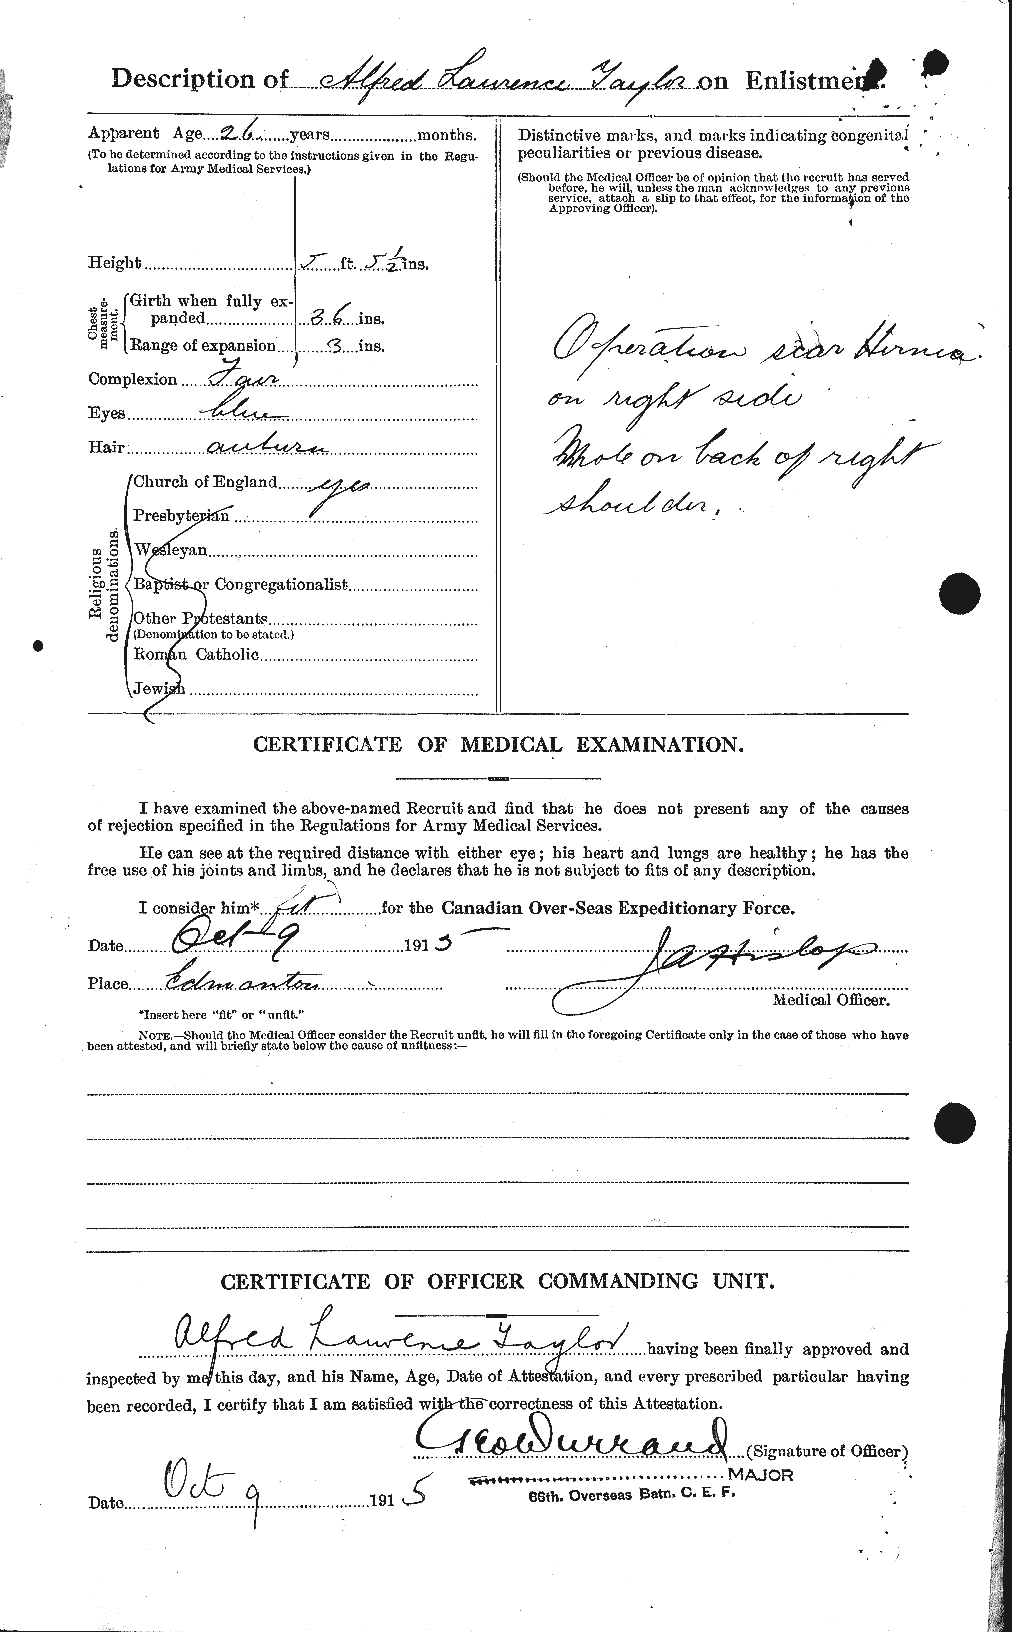 Personnel Records of the First World War - CEF 626191b